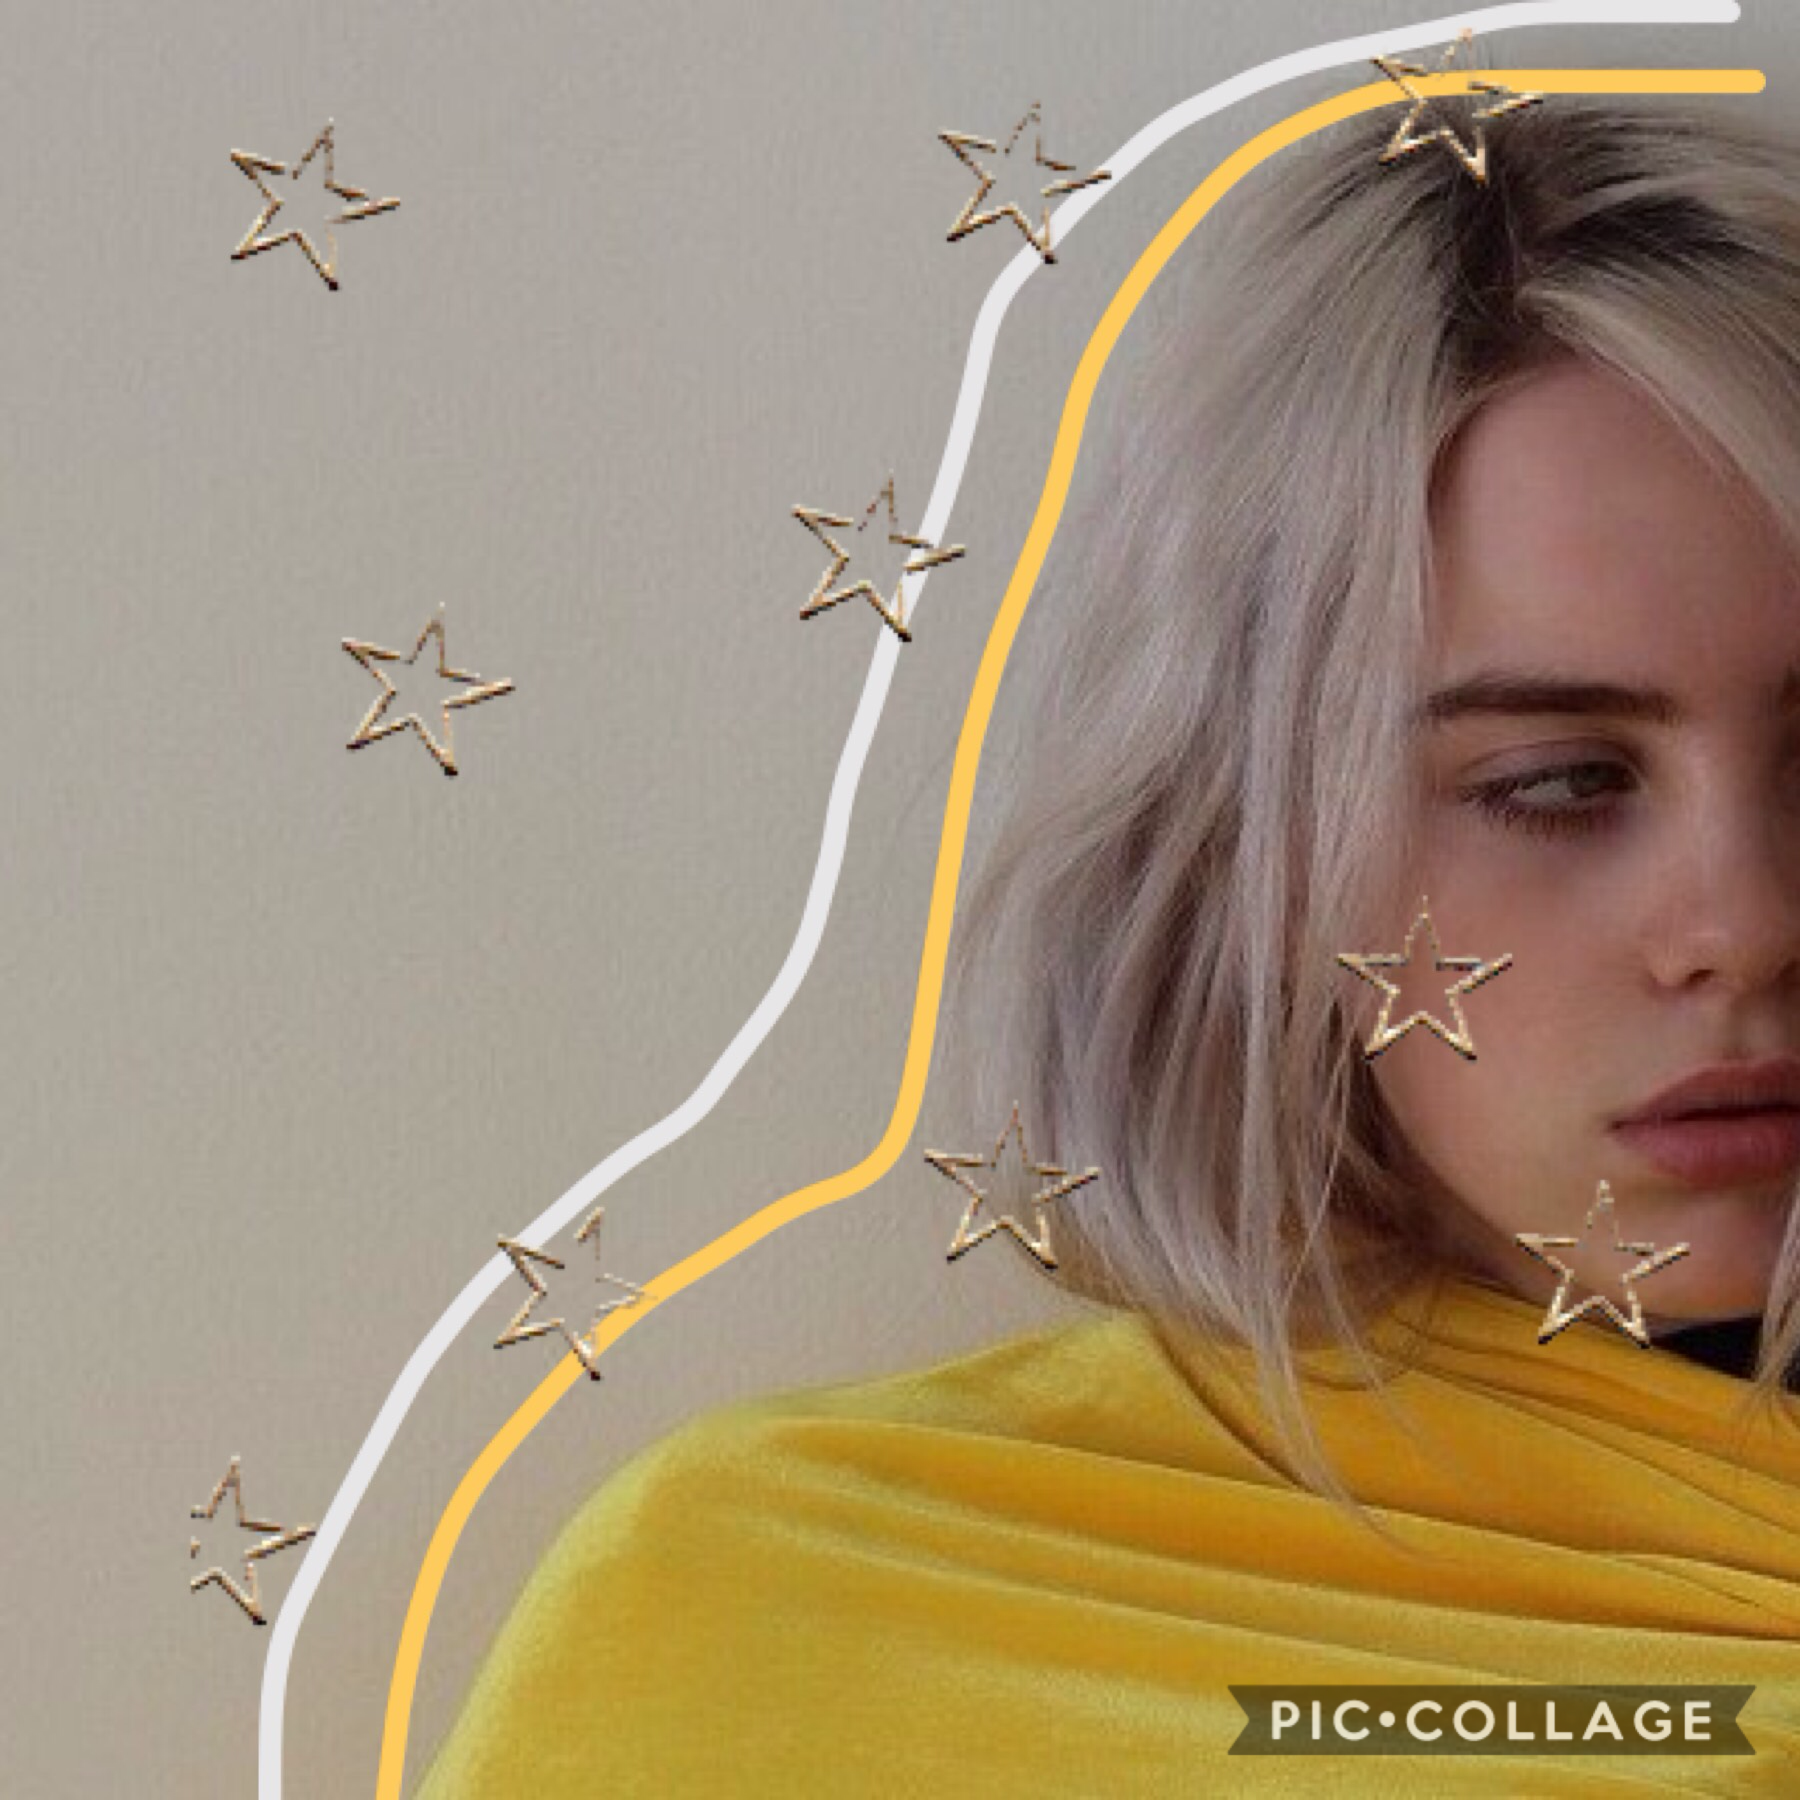 Everyone is doing a collage on Billie Eilish so that brings me here. 